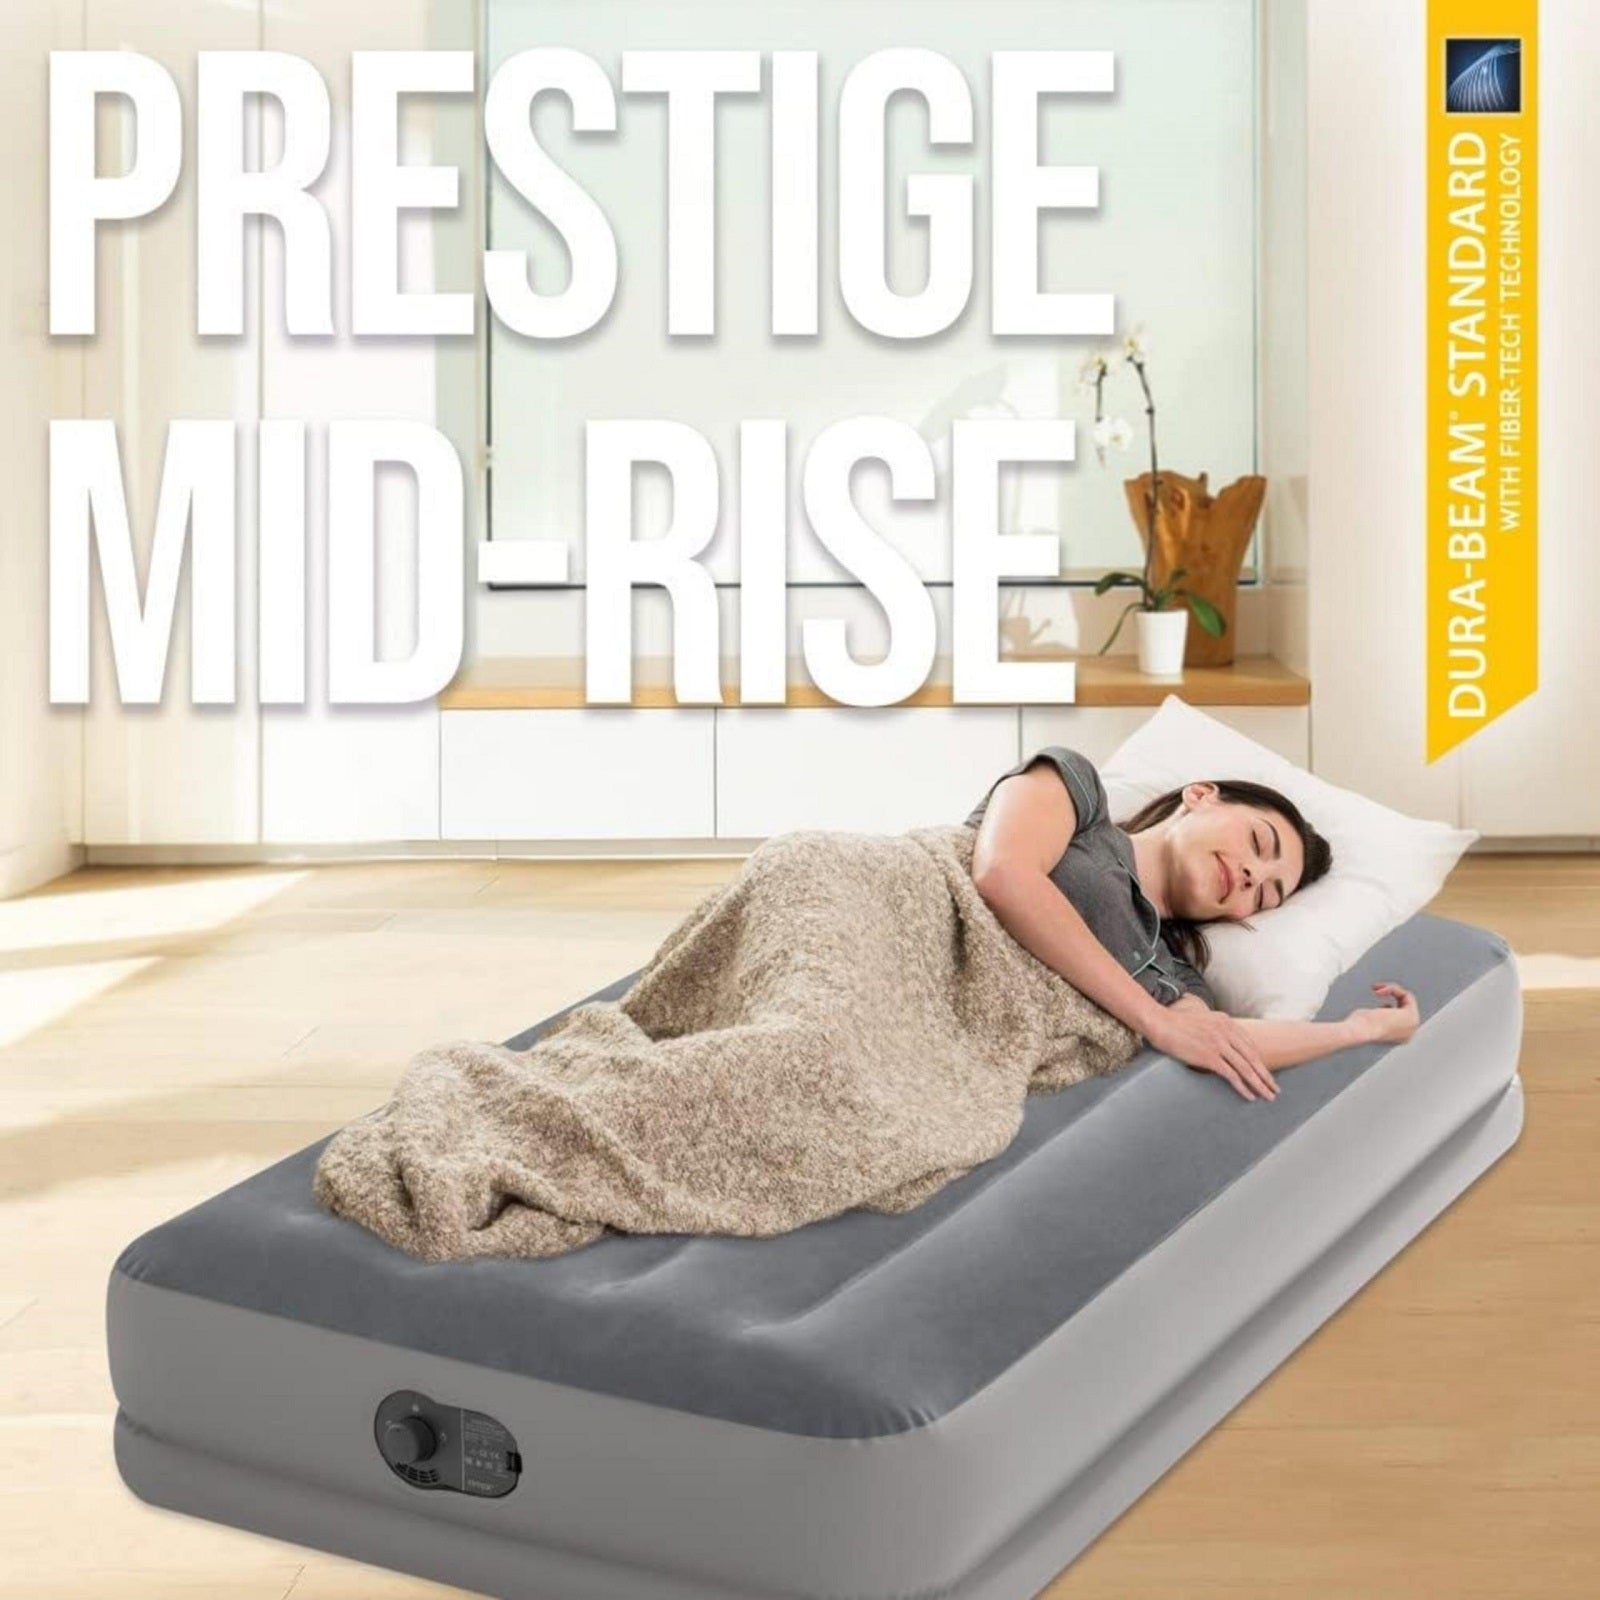 Twin Dura-Beam Prestige Air Bed Built-In USB Electric Pump for easy inflation and deflation